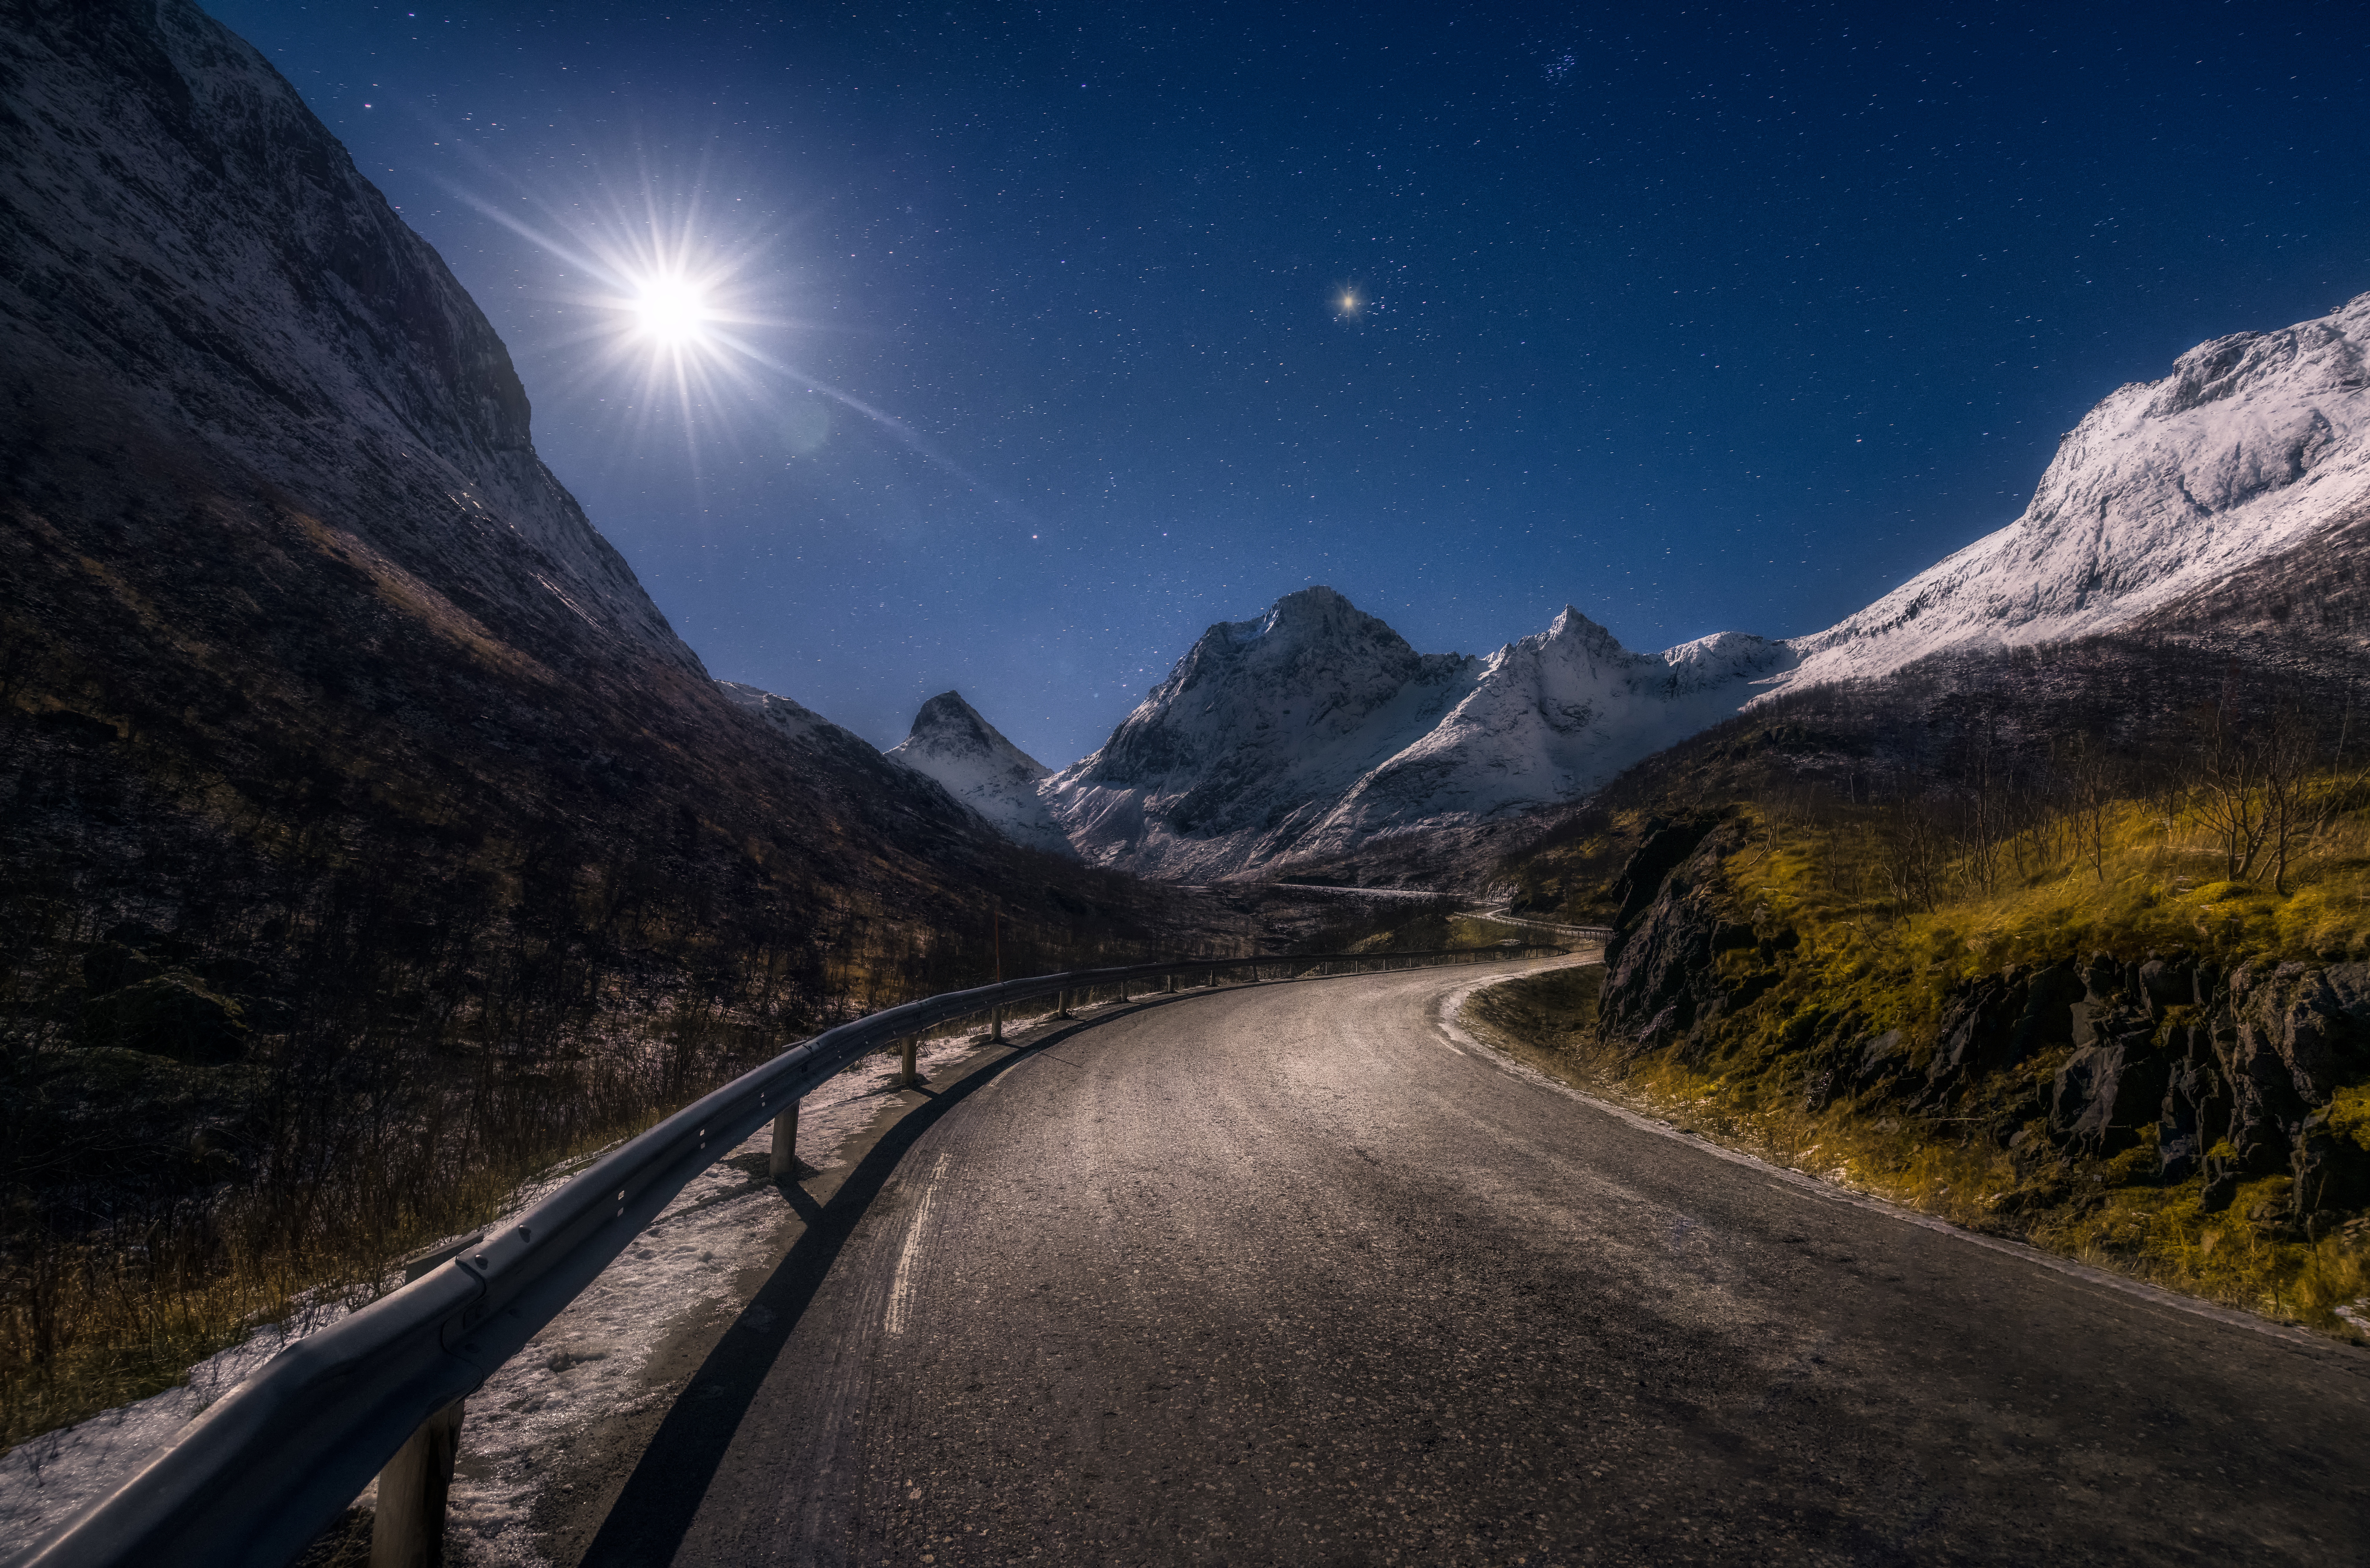 Night road in the mountains